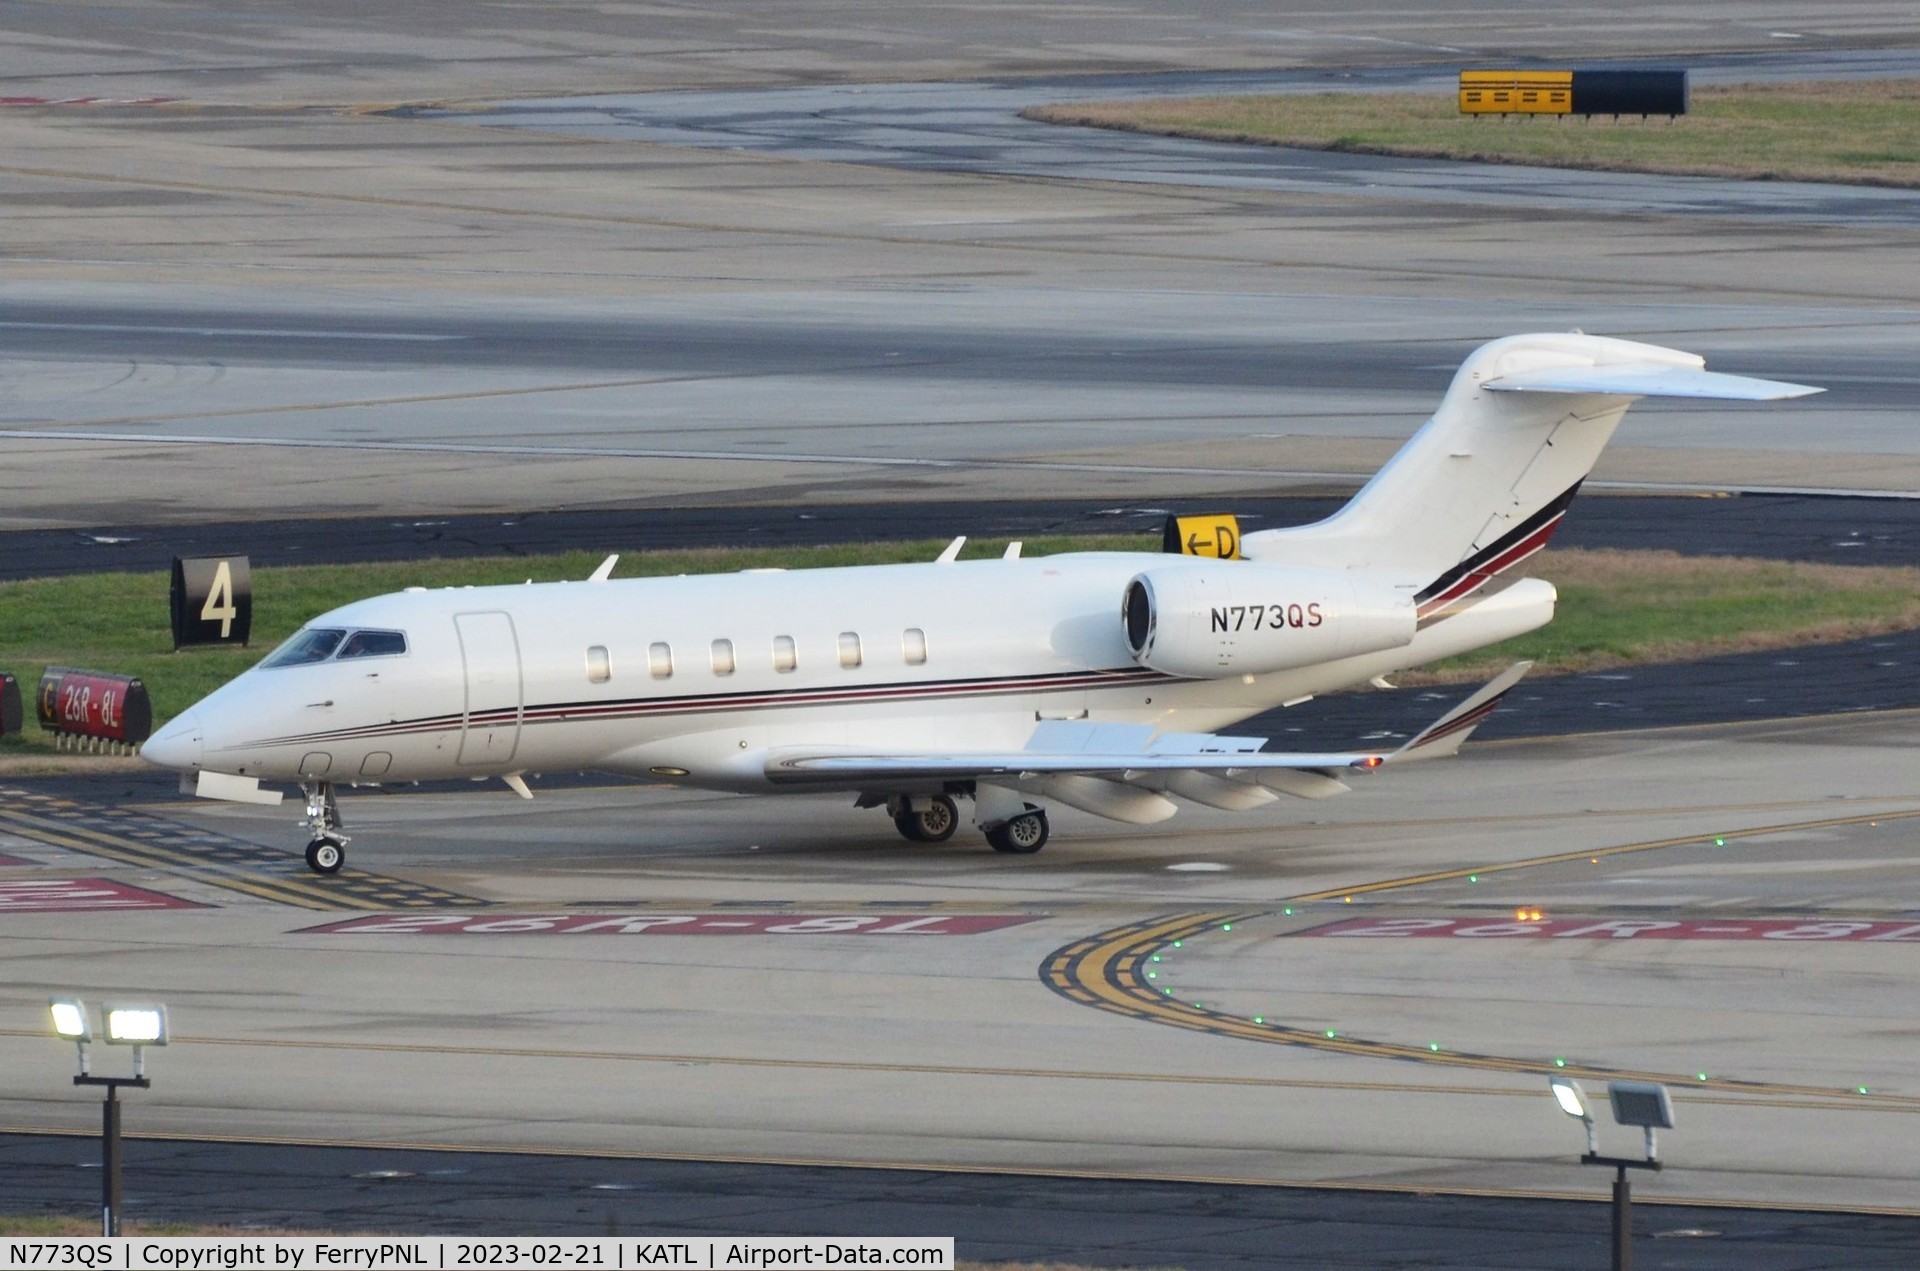 N773QS, 2018 Bombardier Challenger 350 C/N 20773, Netjets CL350 taxying to the FBO